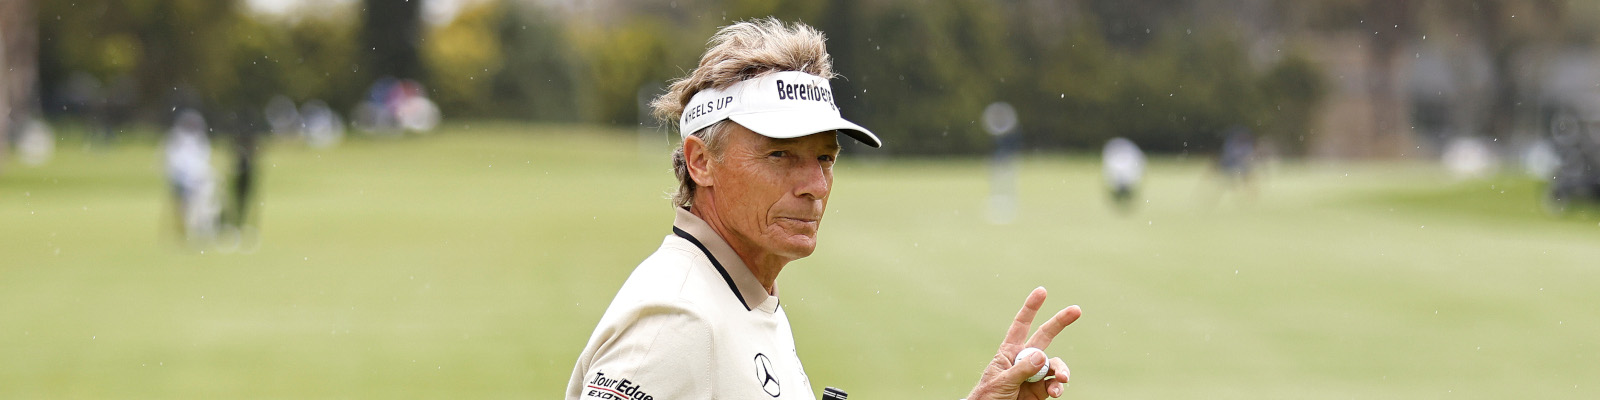 Bernhard Langer (Photo by Michael Owens/Getty Images)